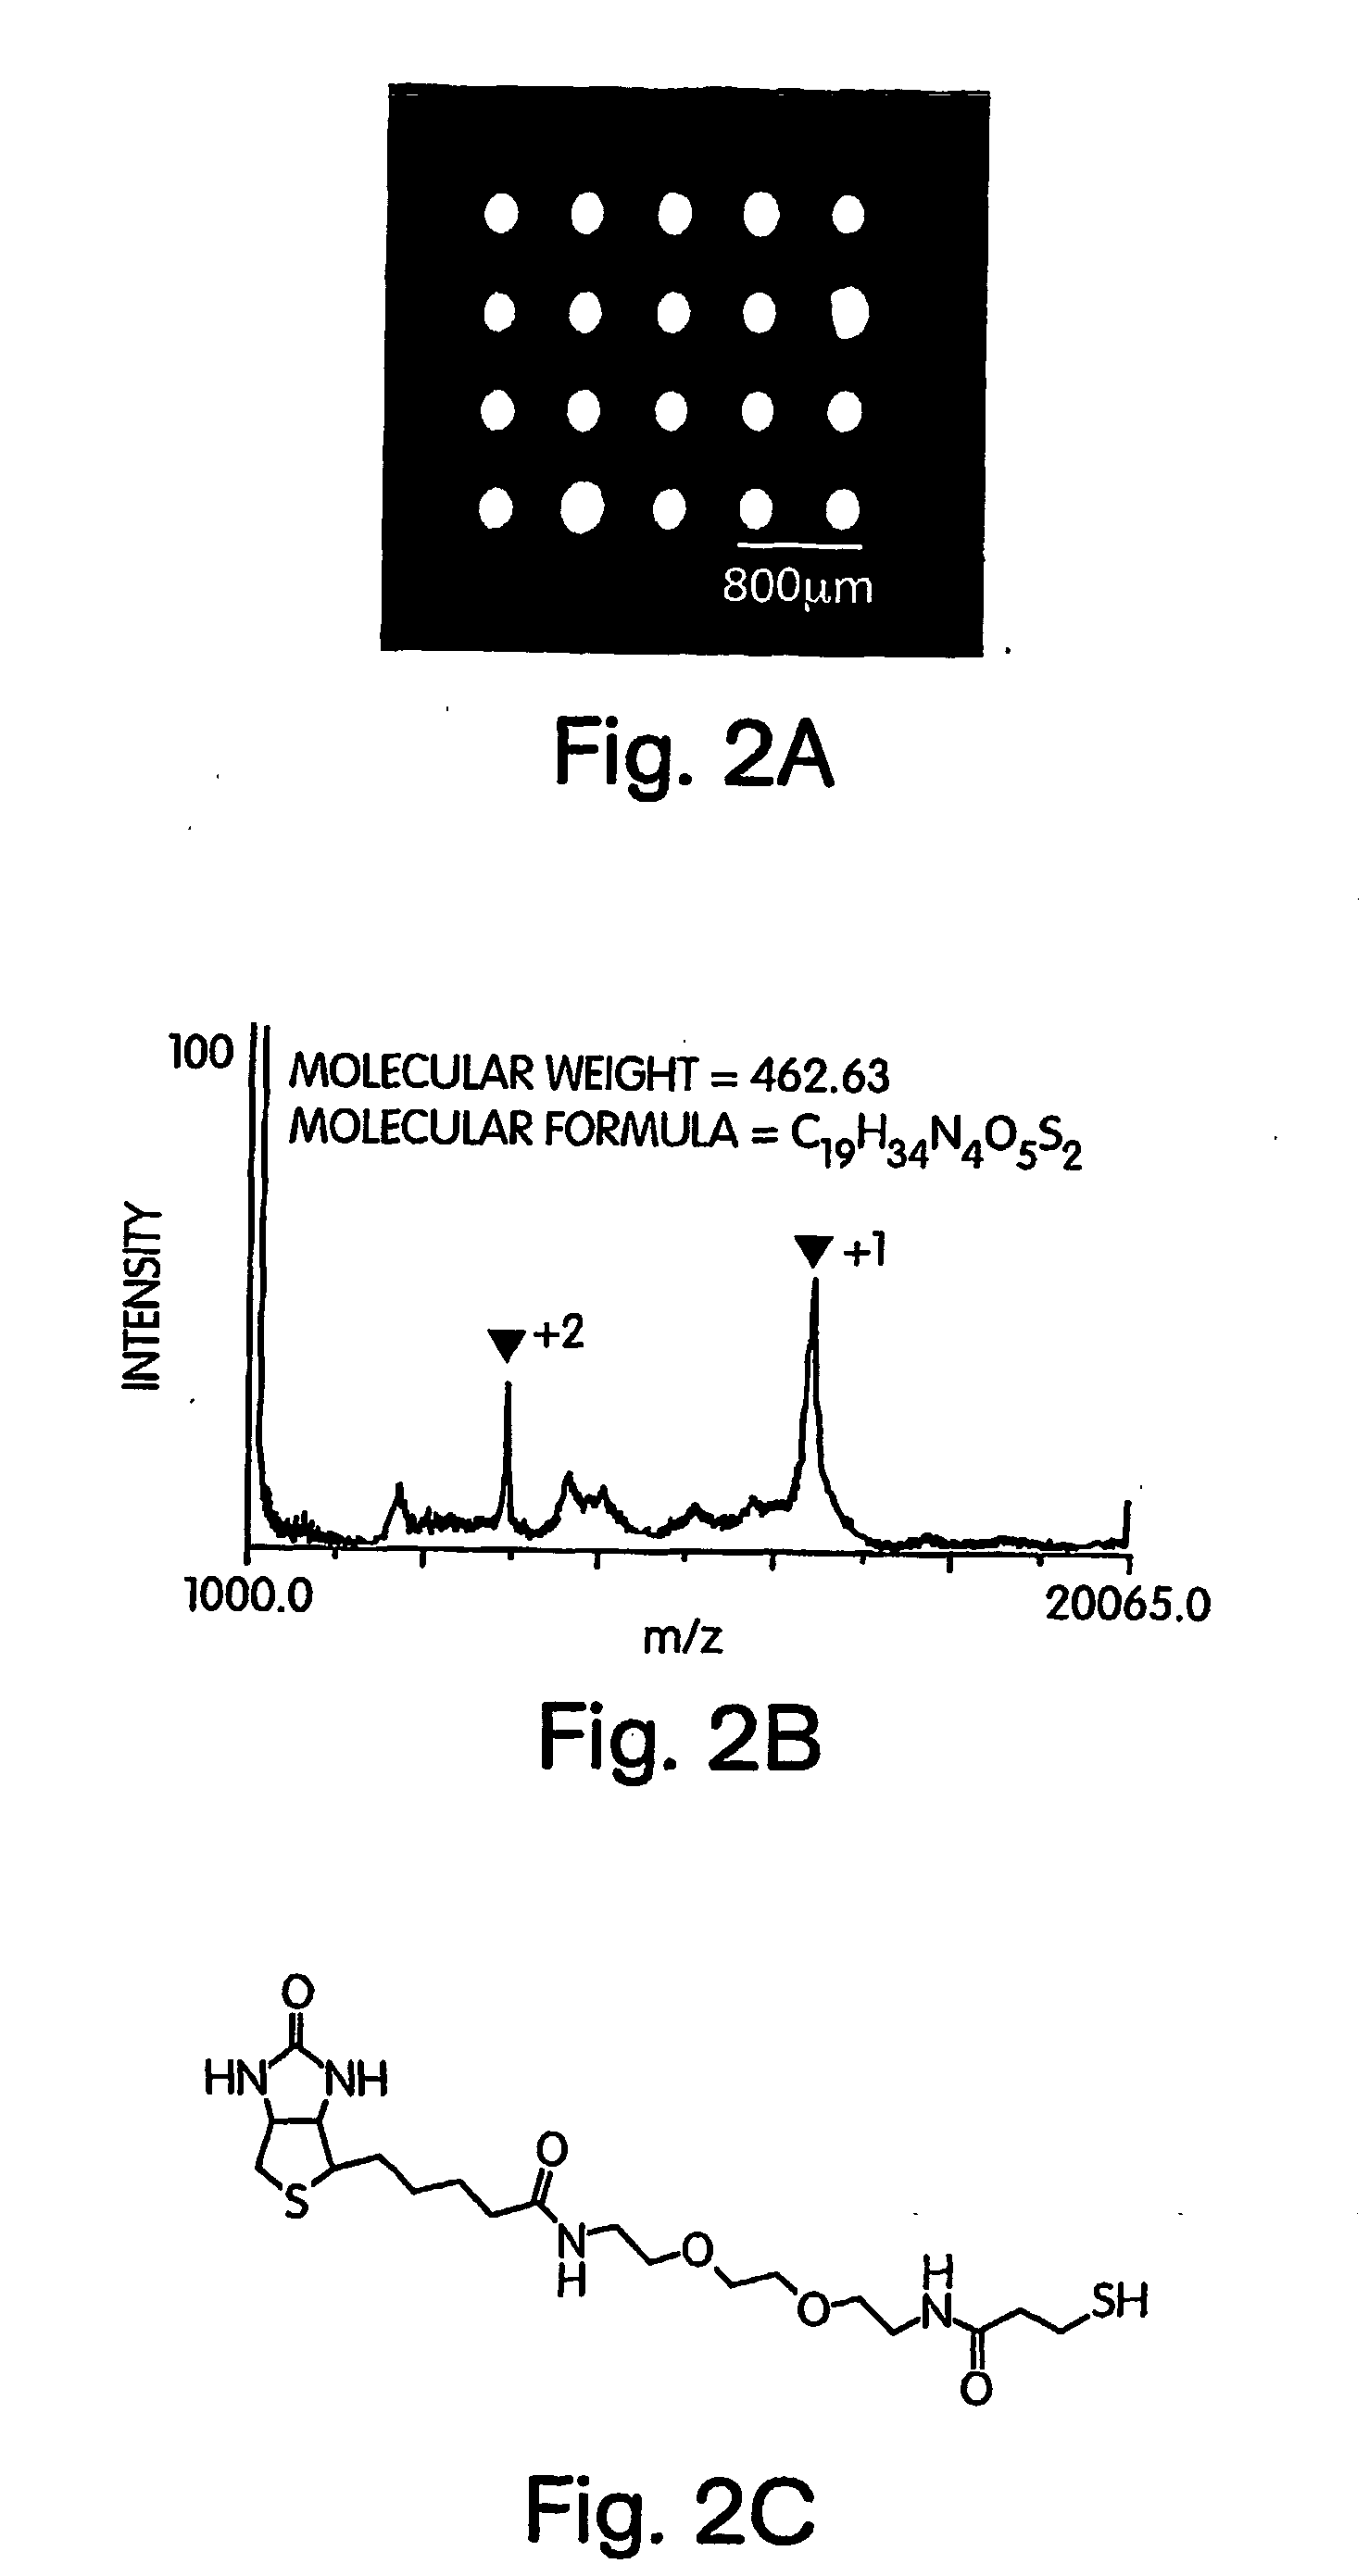 Determination of Proteins and/or Other Molecules Using Mass Spectroscopy